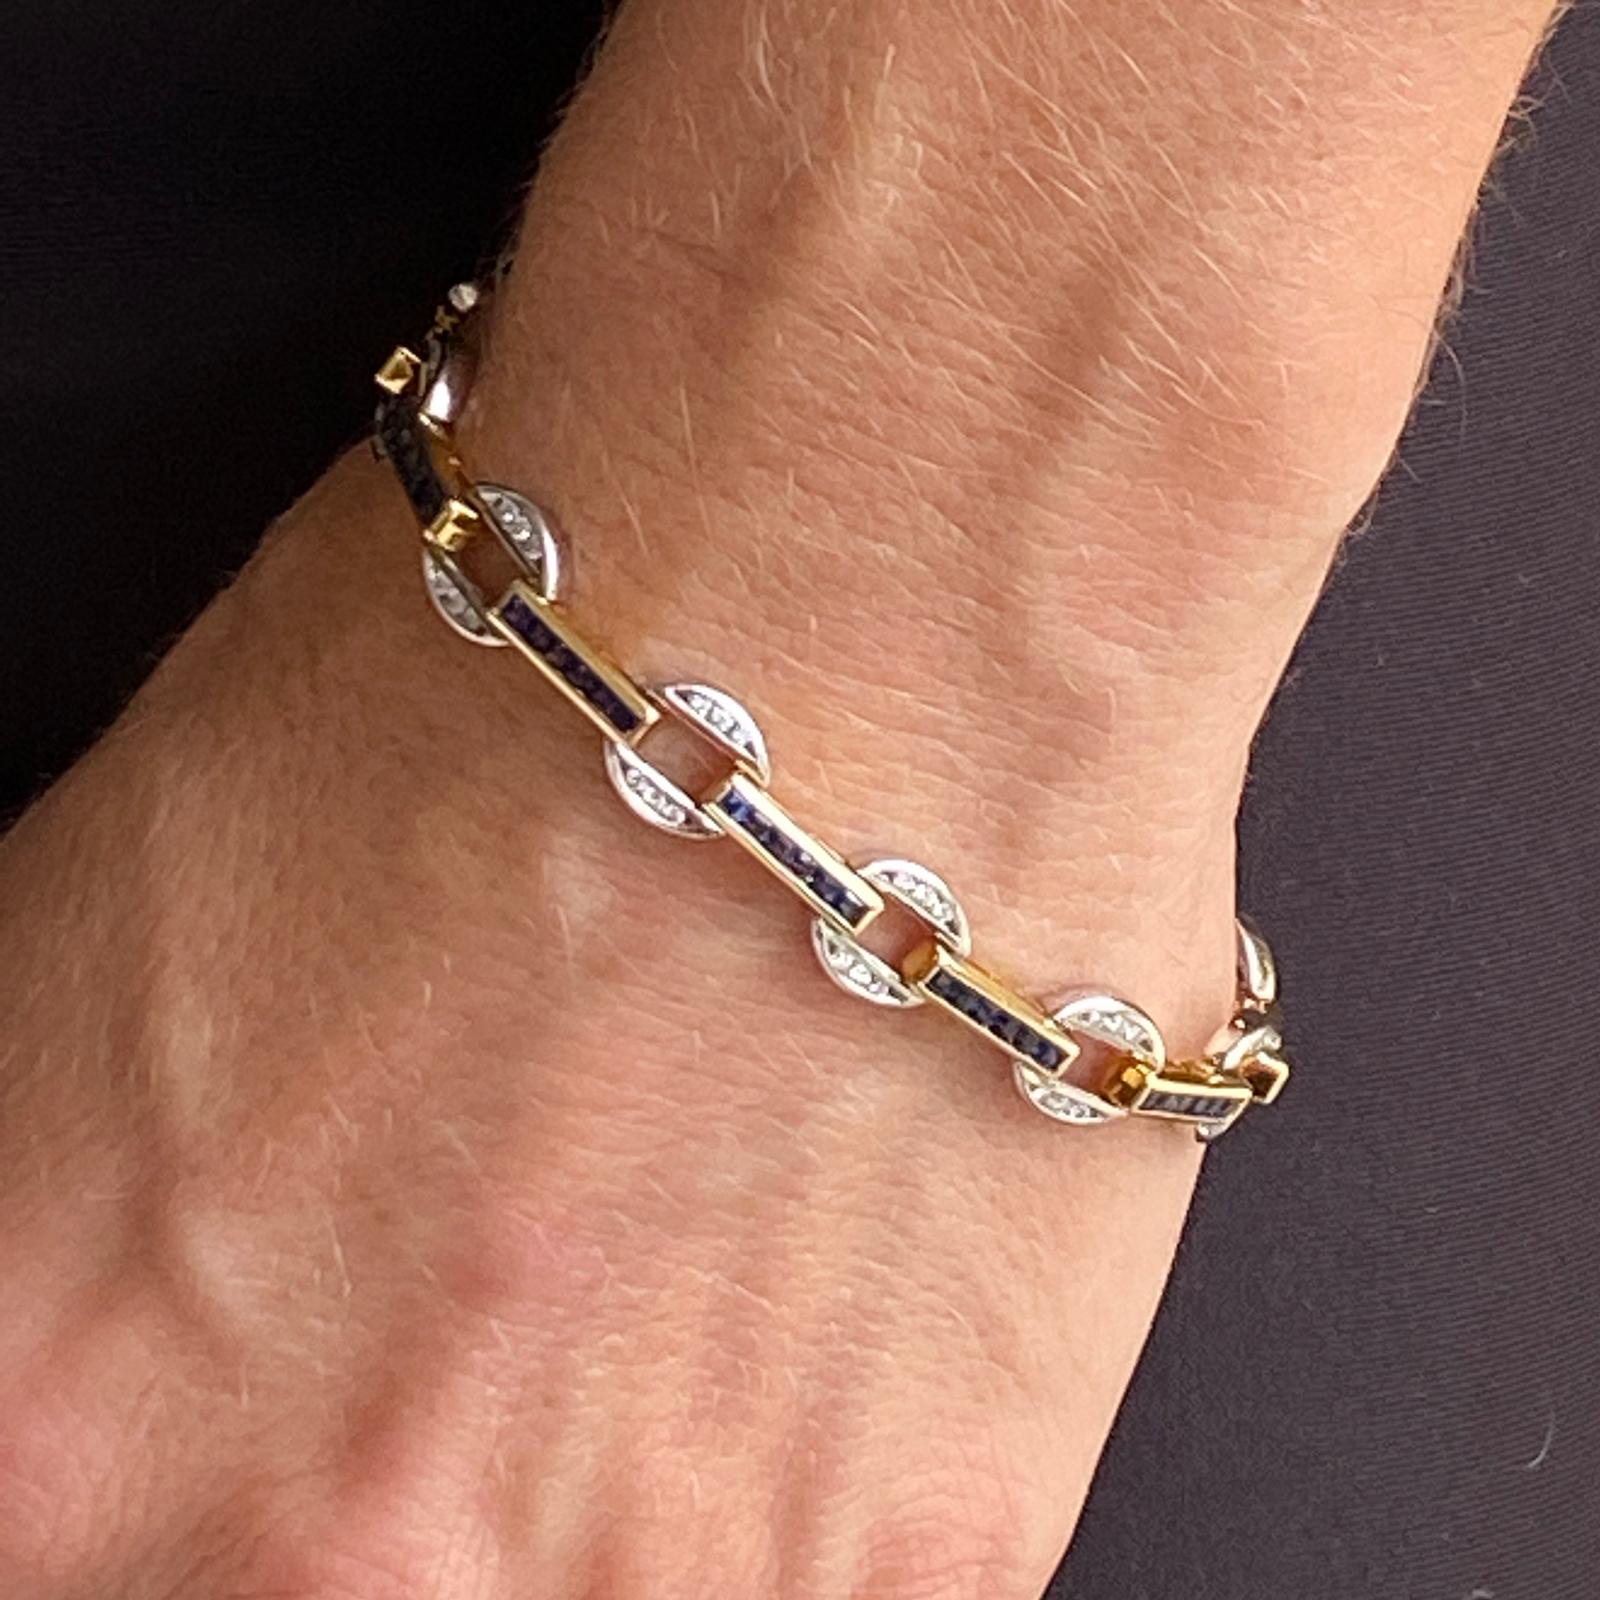 Beautiful sapphire and diamond bracelet fashioned in 14 karat white and yellow gold. The bracelet features round brilliant cut diamonds weighing 1.00 carat total weight and graded G-I color and VS clarity. The diamonds alternate with princess cut